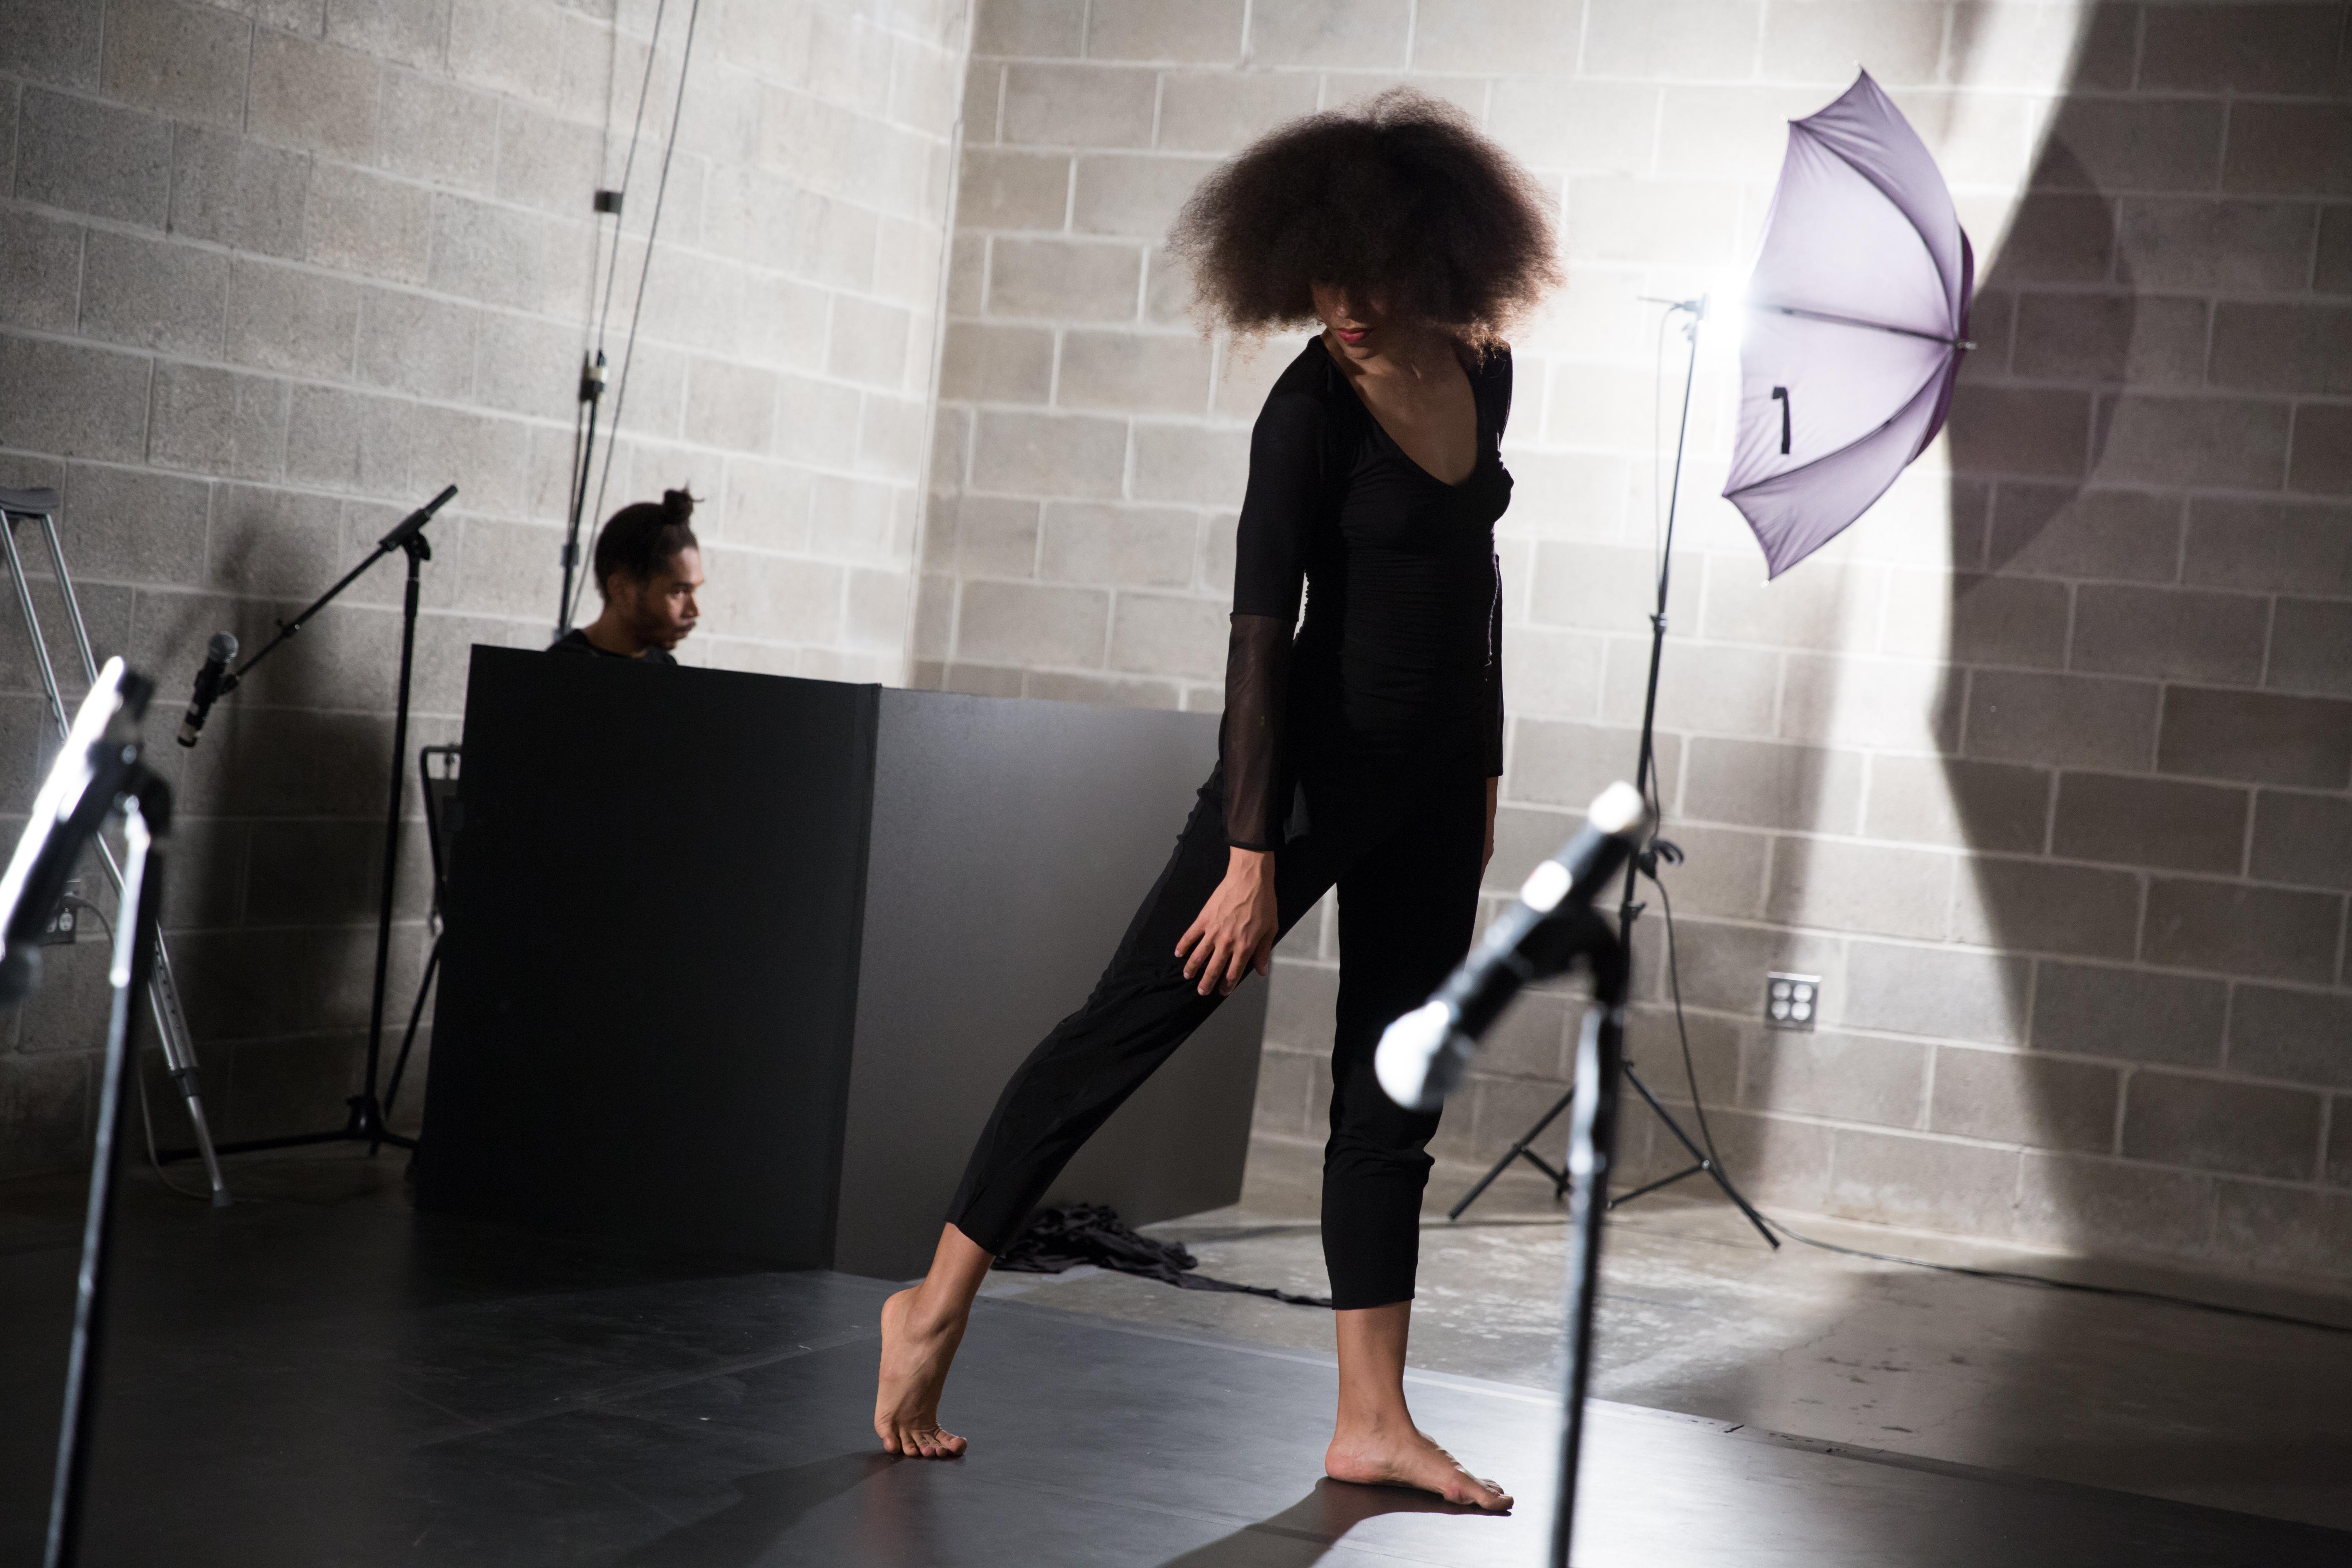 In a cement block–walled space, set like a photography studio with lights and sound equipment, a medium dark–skinned dancer in black clothes poses. Looking down, their face is obscured by curly brown hair.